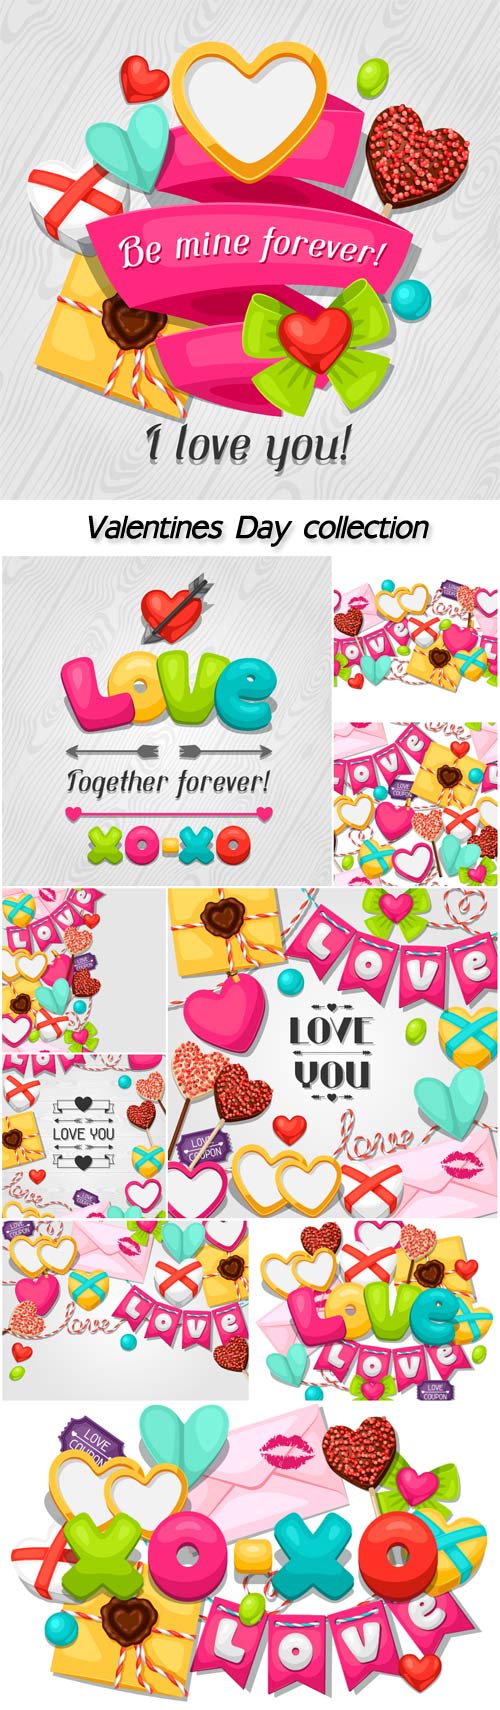 Seamless pattern with hearts, objects, decorations, Valentines Day